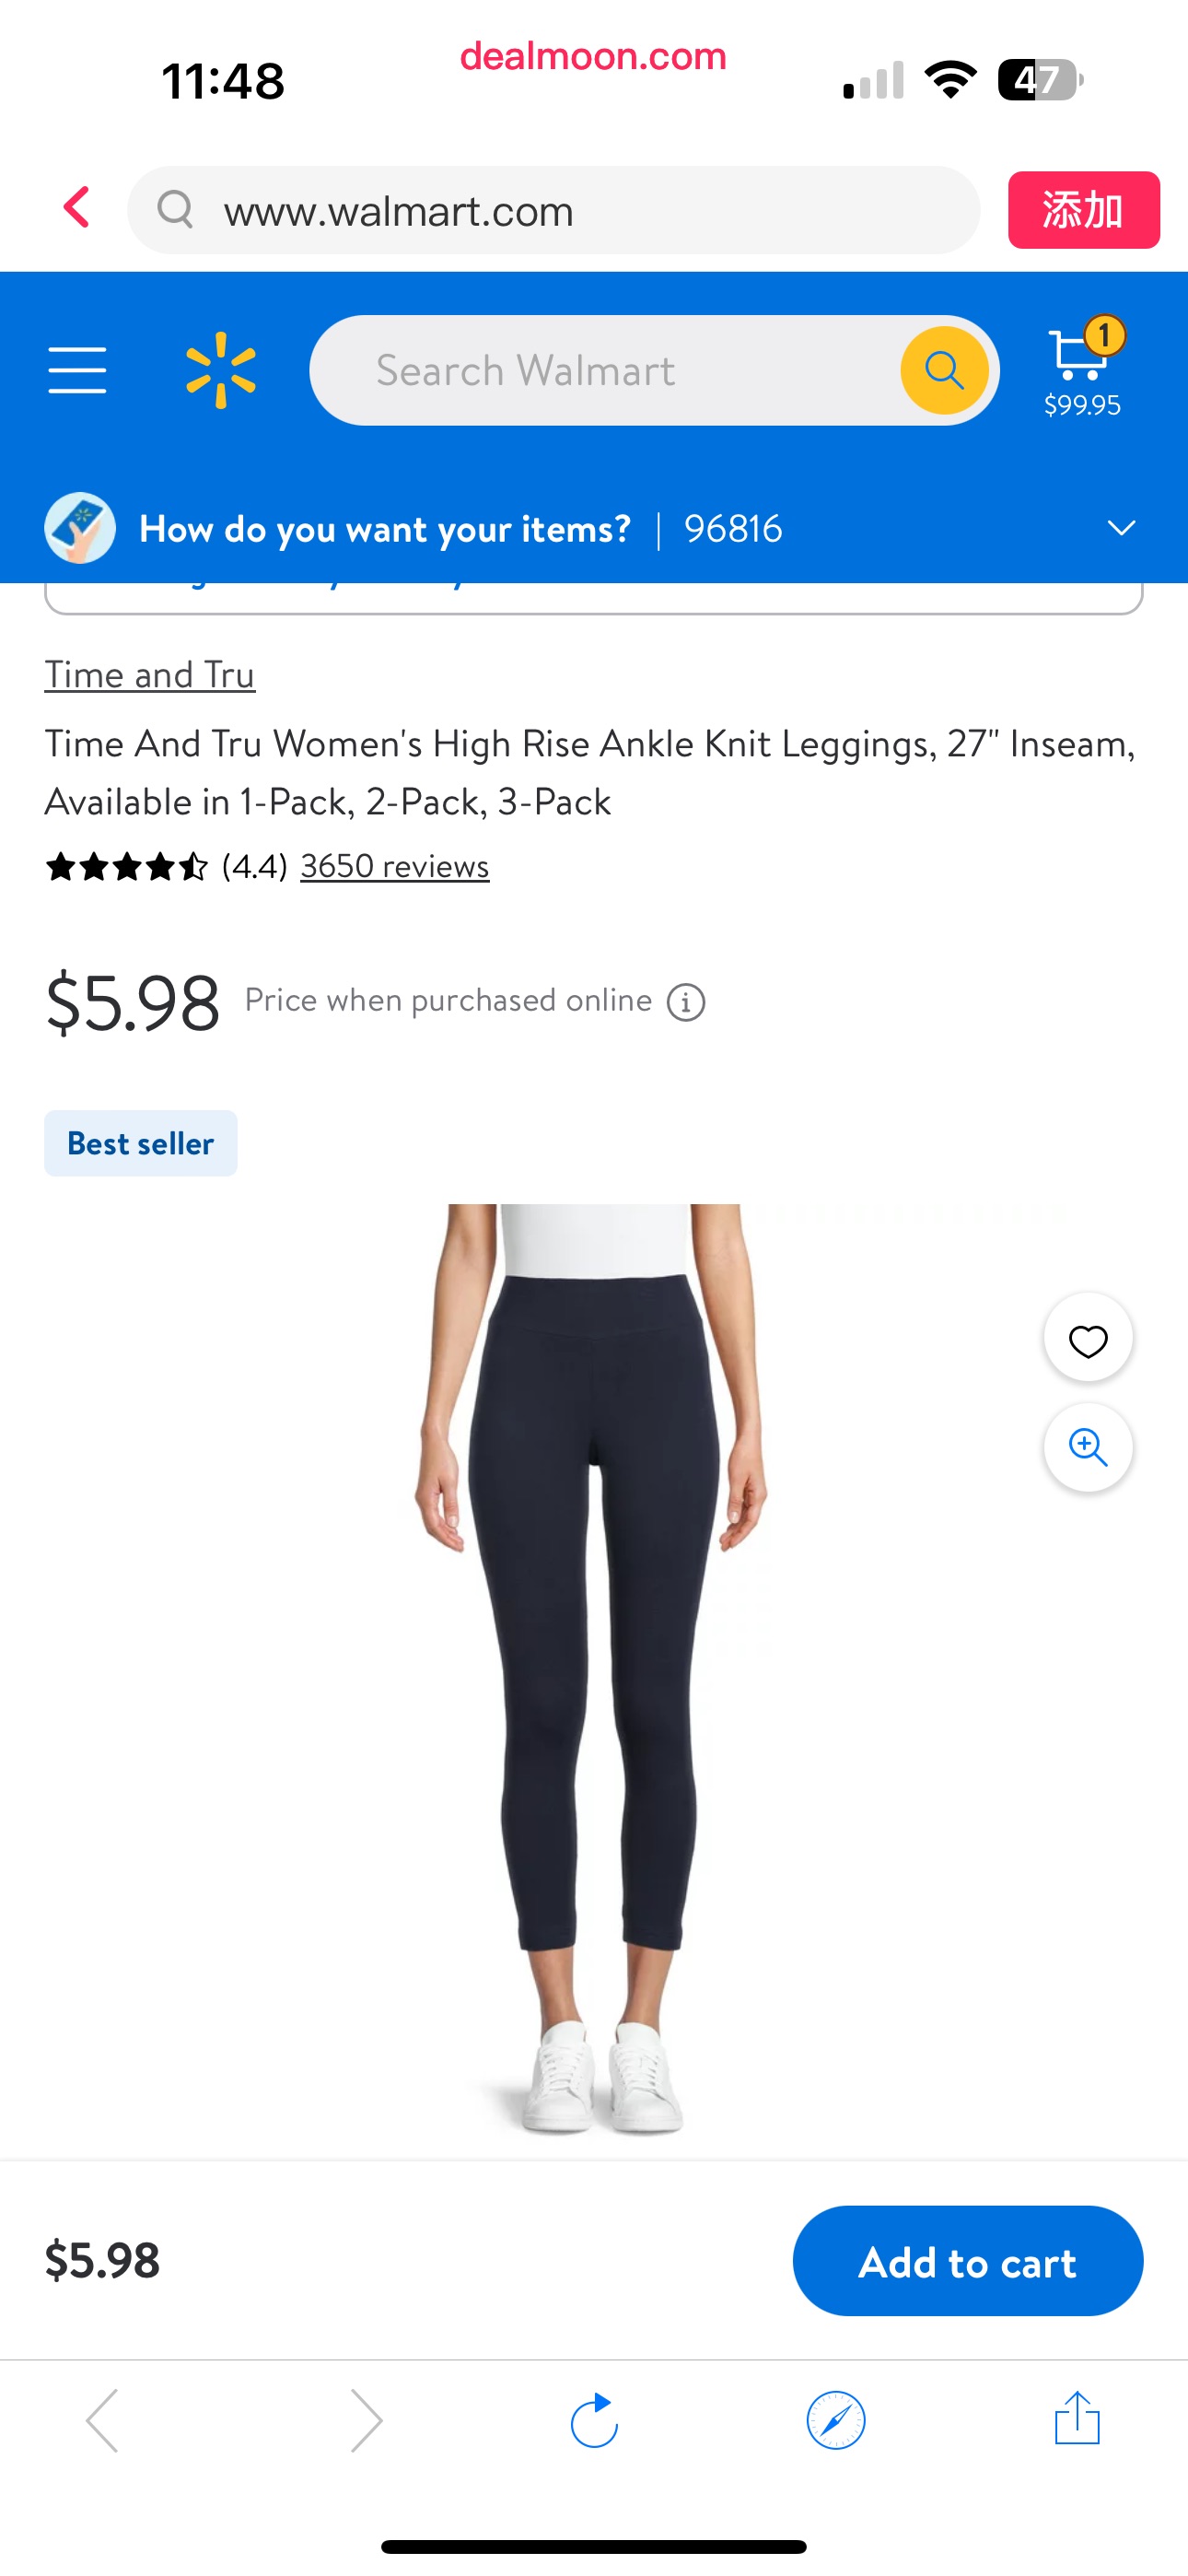 Time And Tru Women's High Rise Ankle Knit Leggings, 27" Inseam, Available in 1-Pack, 2-Pack, 3-Pack - Walmart.com女高腰腿裤